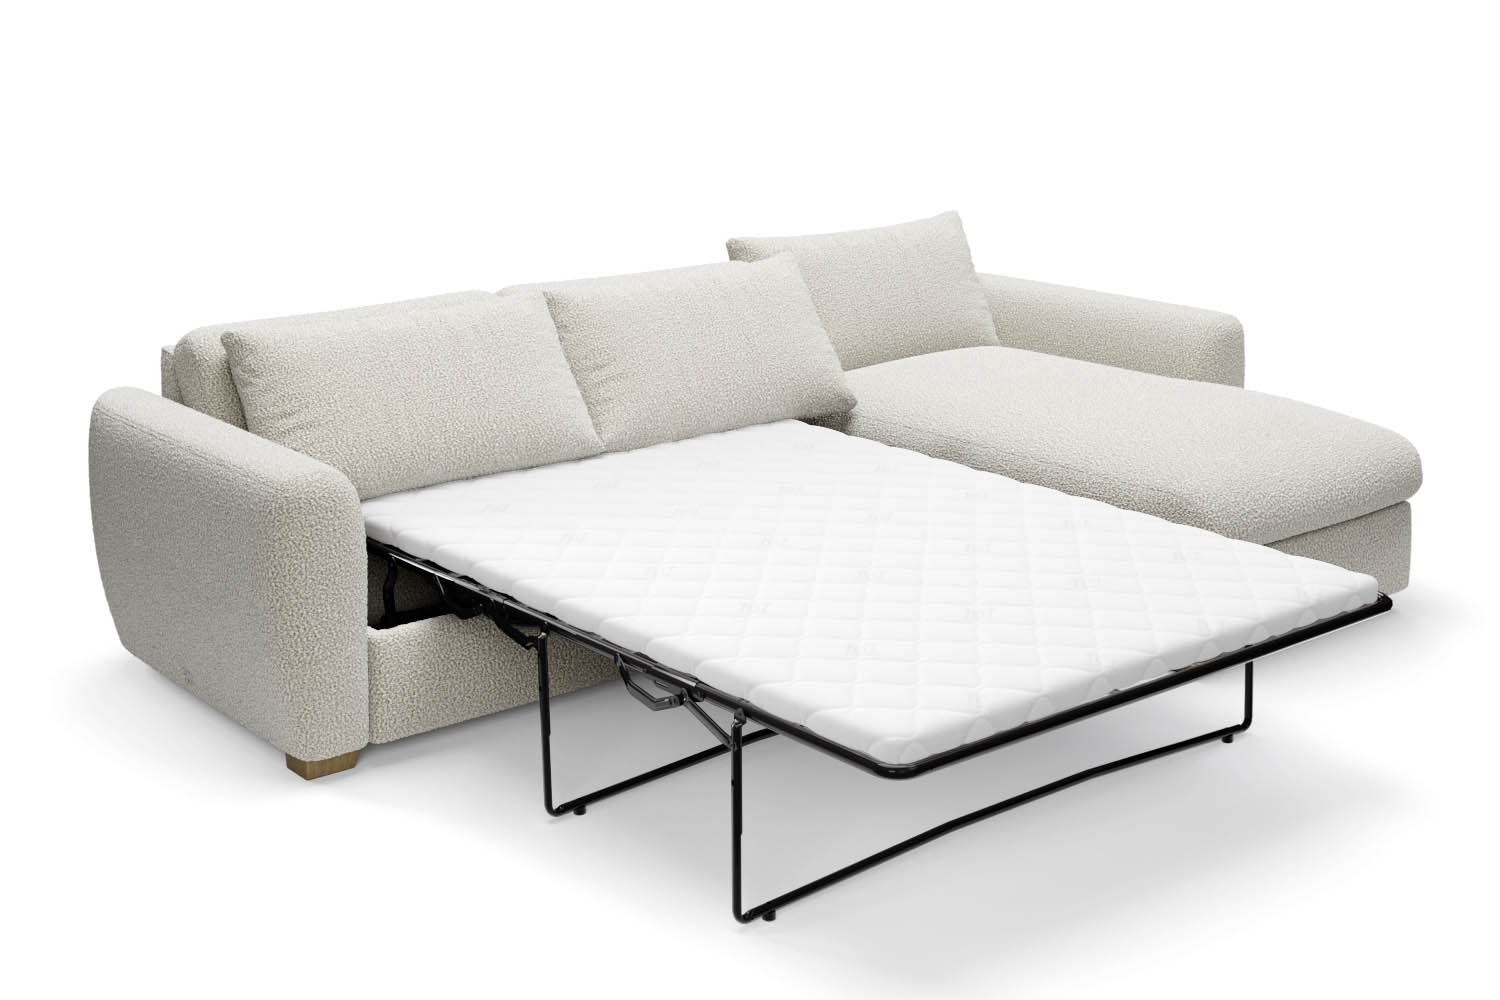 The Cloud Sundae - Chaise Sofa Bed - Fuzzy White Boucle